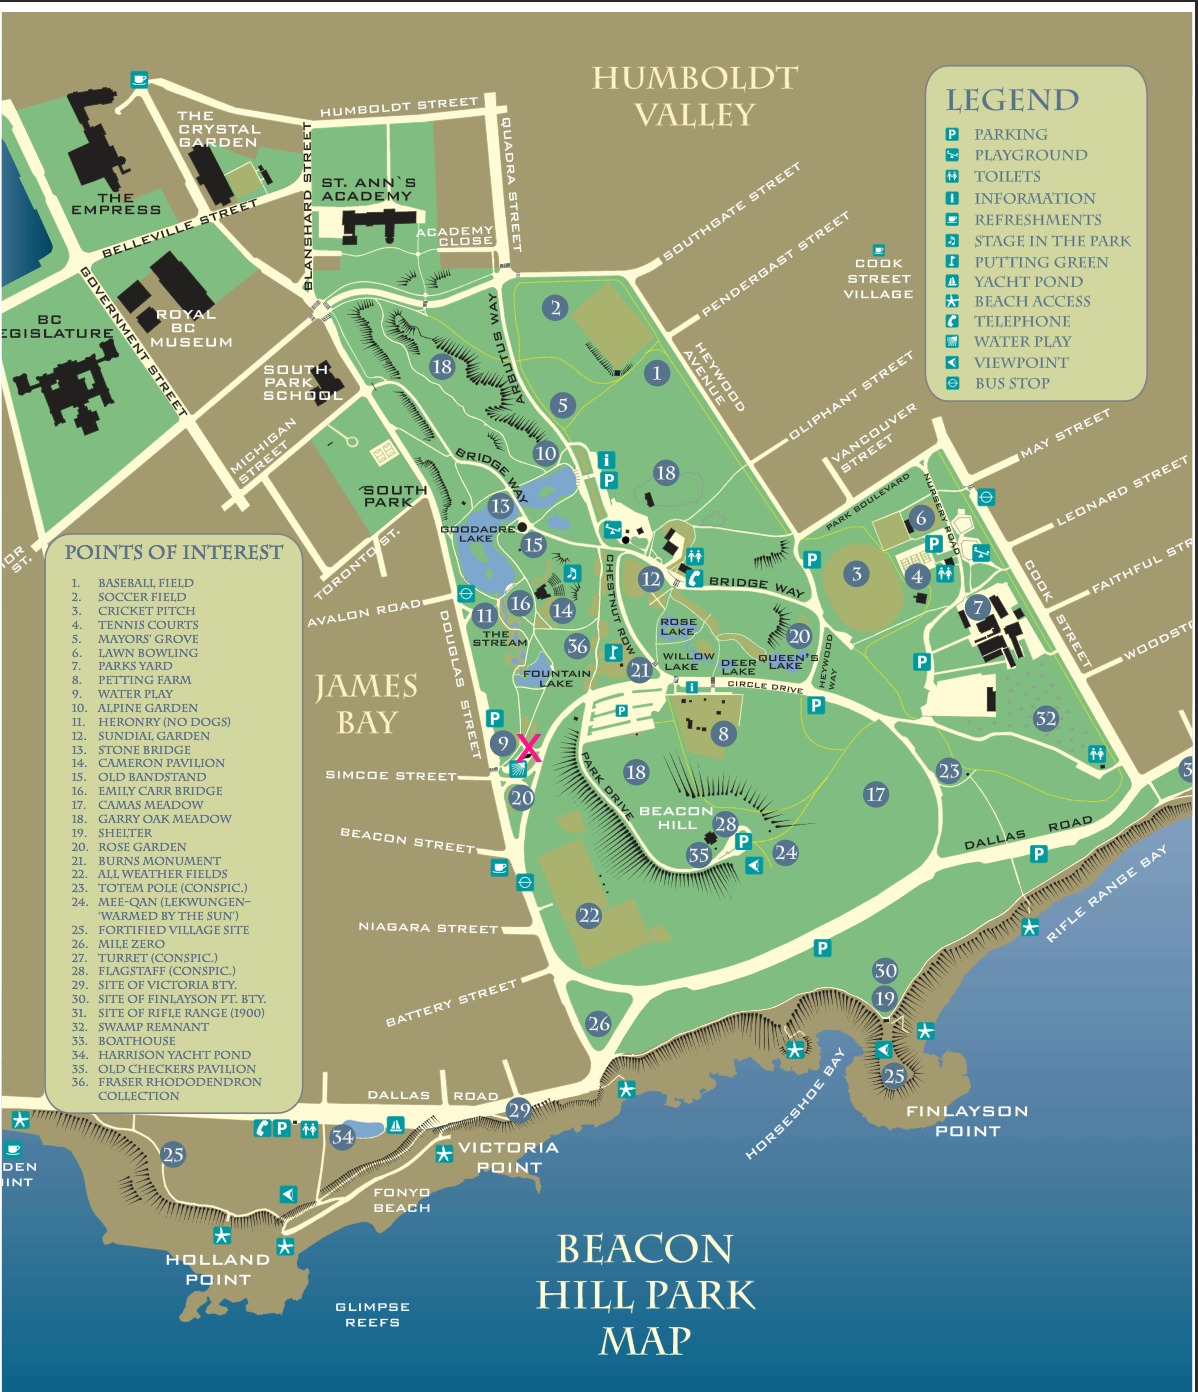 Beacon Hill Park - What To Know BEFORE You Go